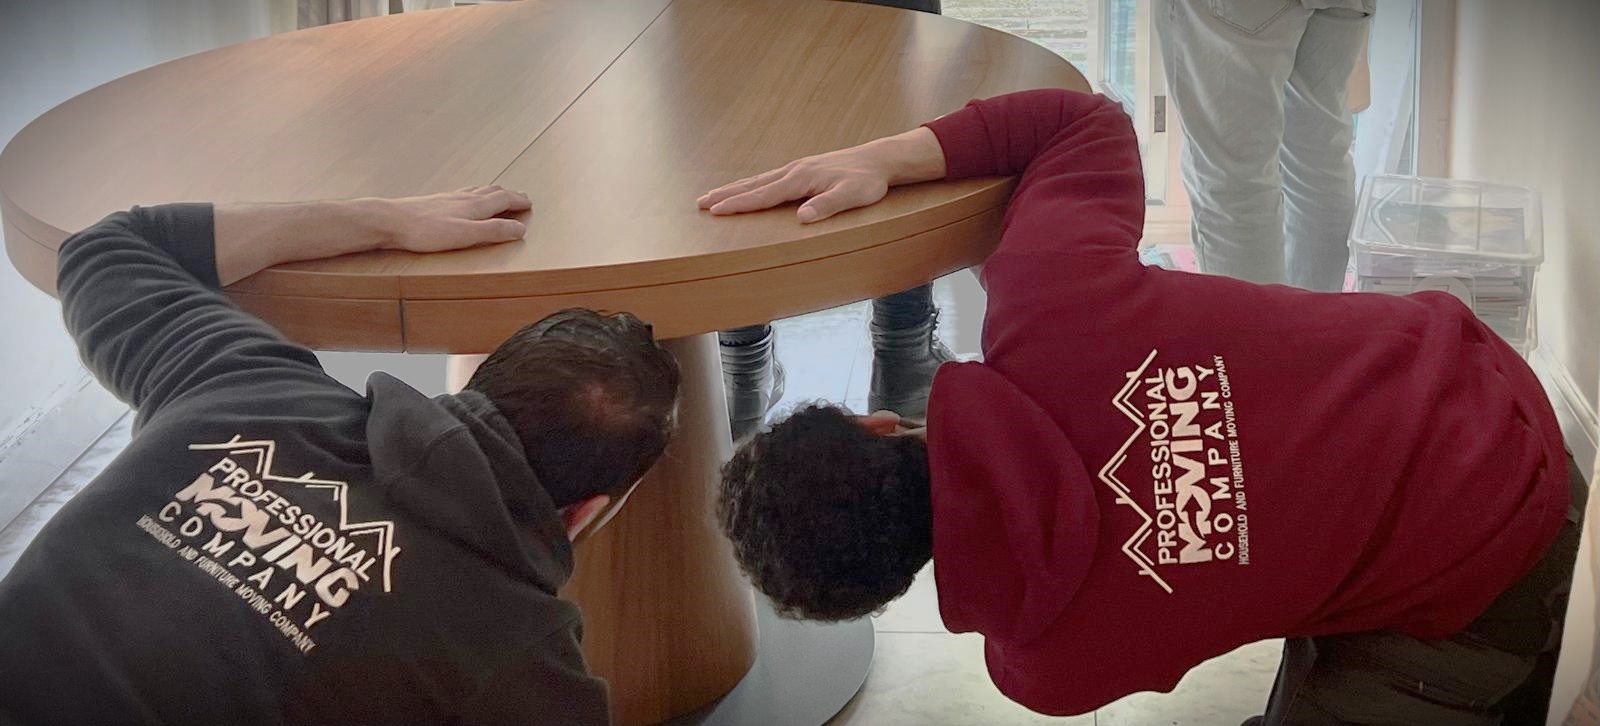 Two movers from Professional Moving Company adjusting a wooden table. They are crouched under the table, ensuring it is securely assembled.